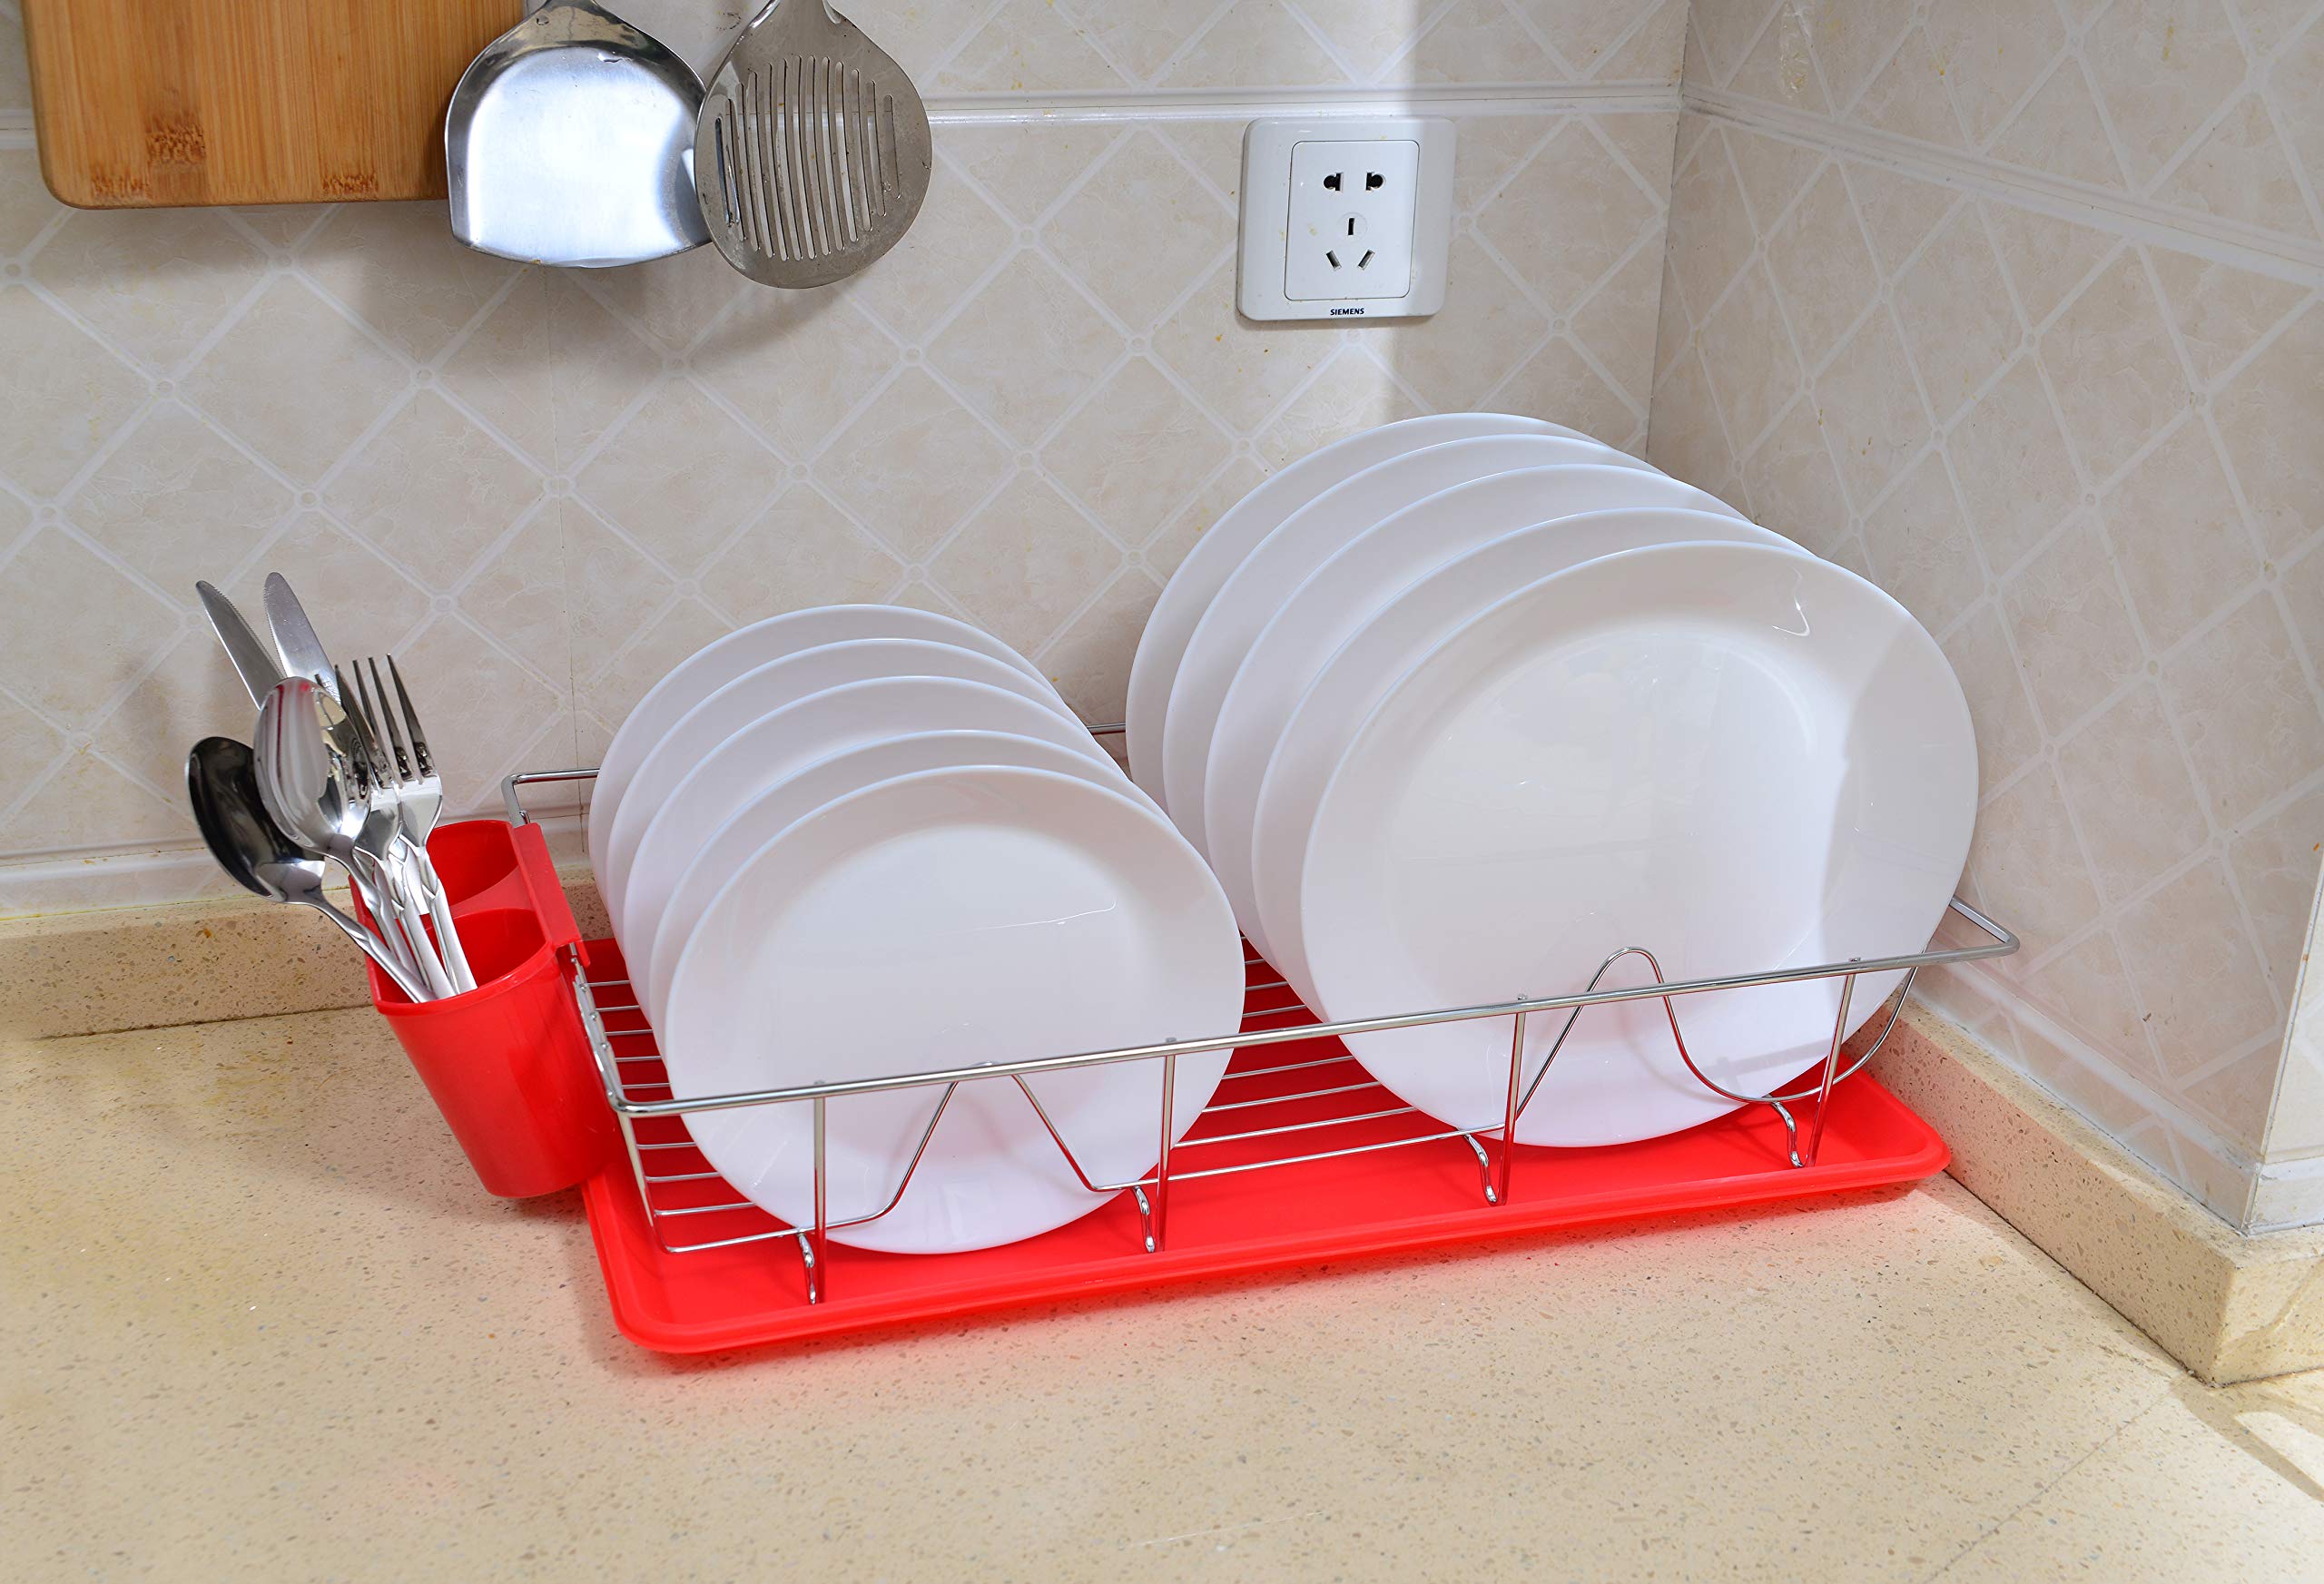 Kitchen Details 3 Piece Countertop Chrome Dish Drying Rack with Cutlery Basket and Drainboard Tray, Red